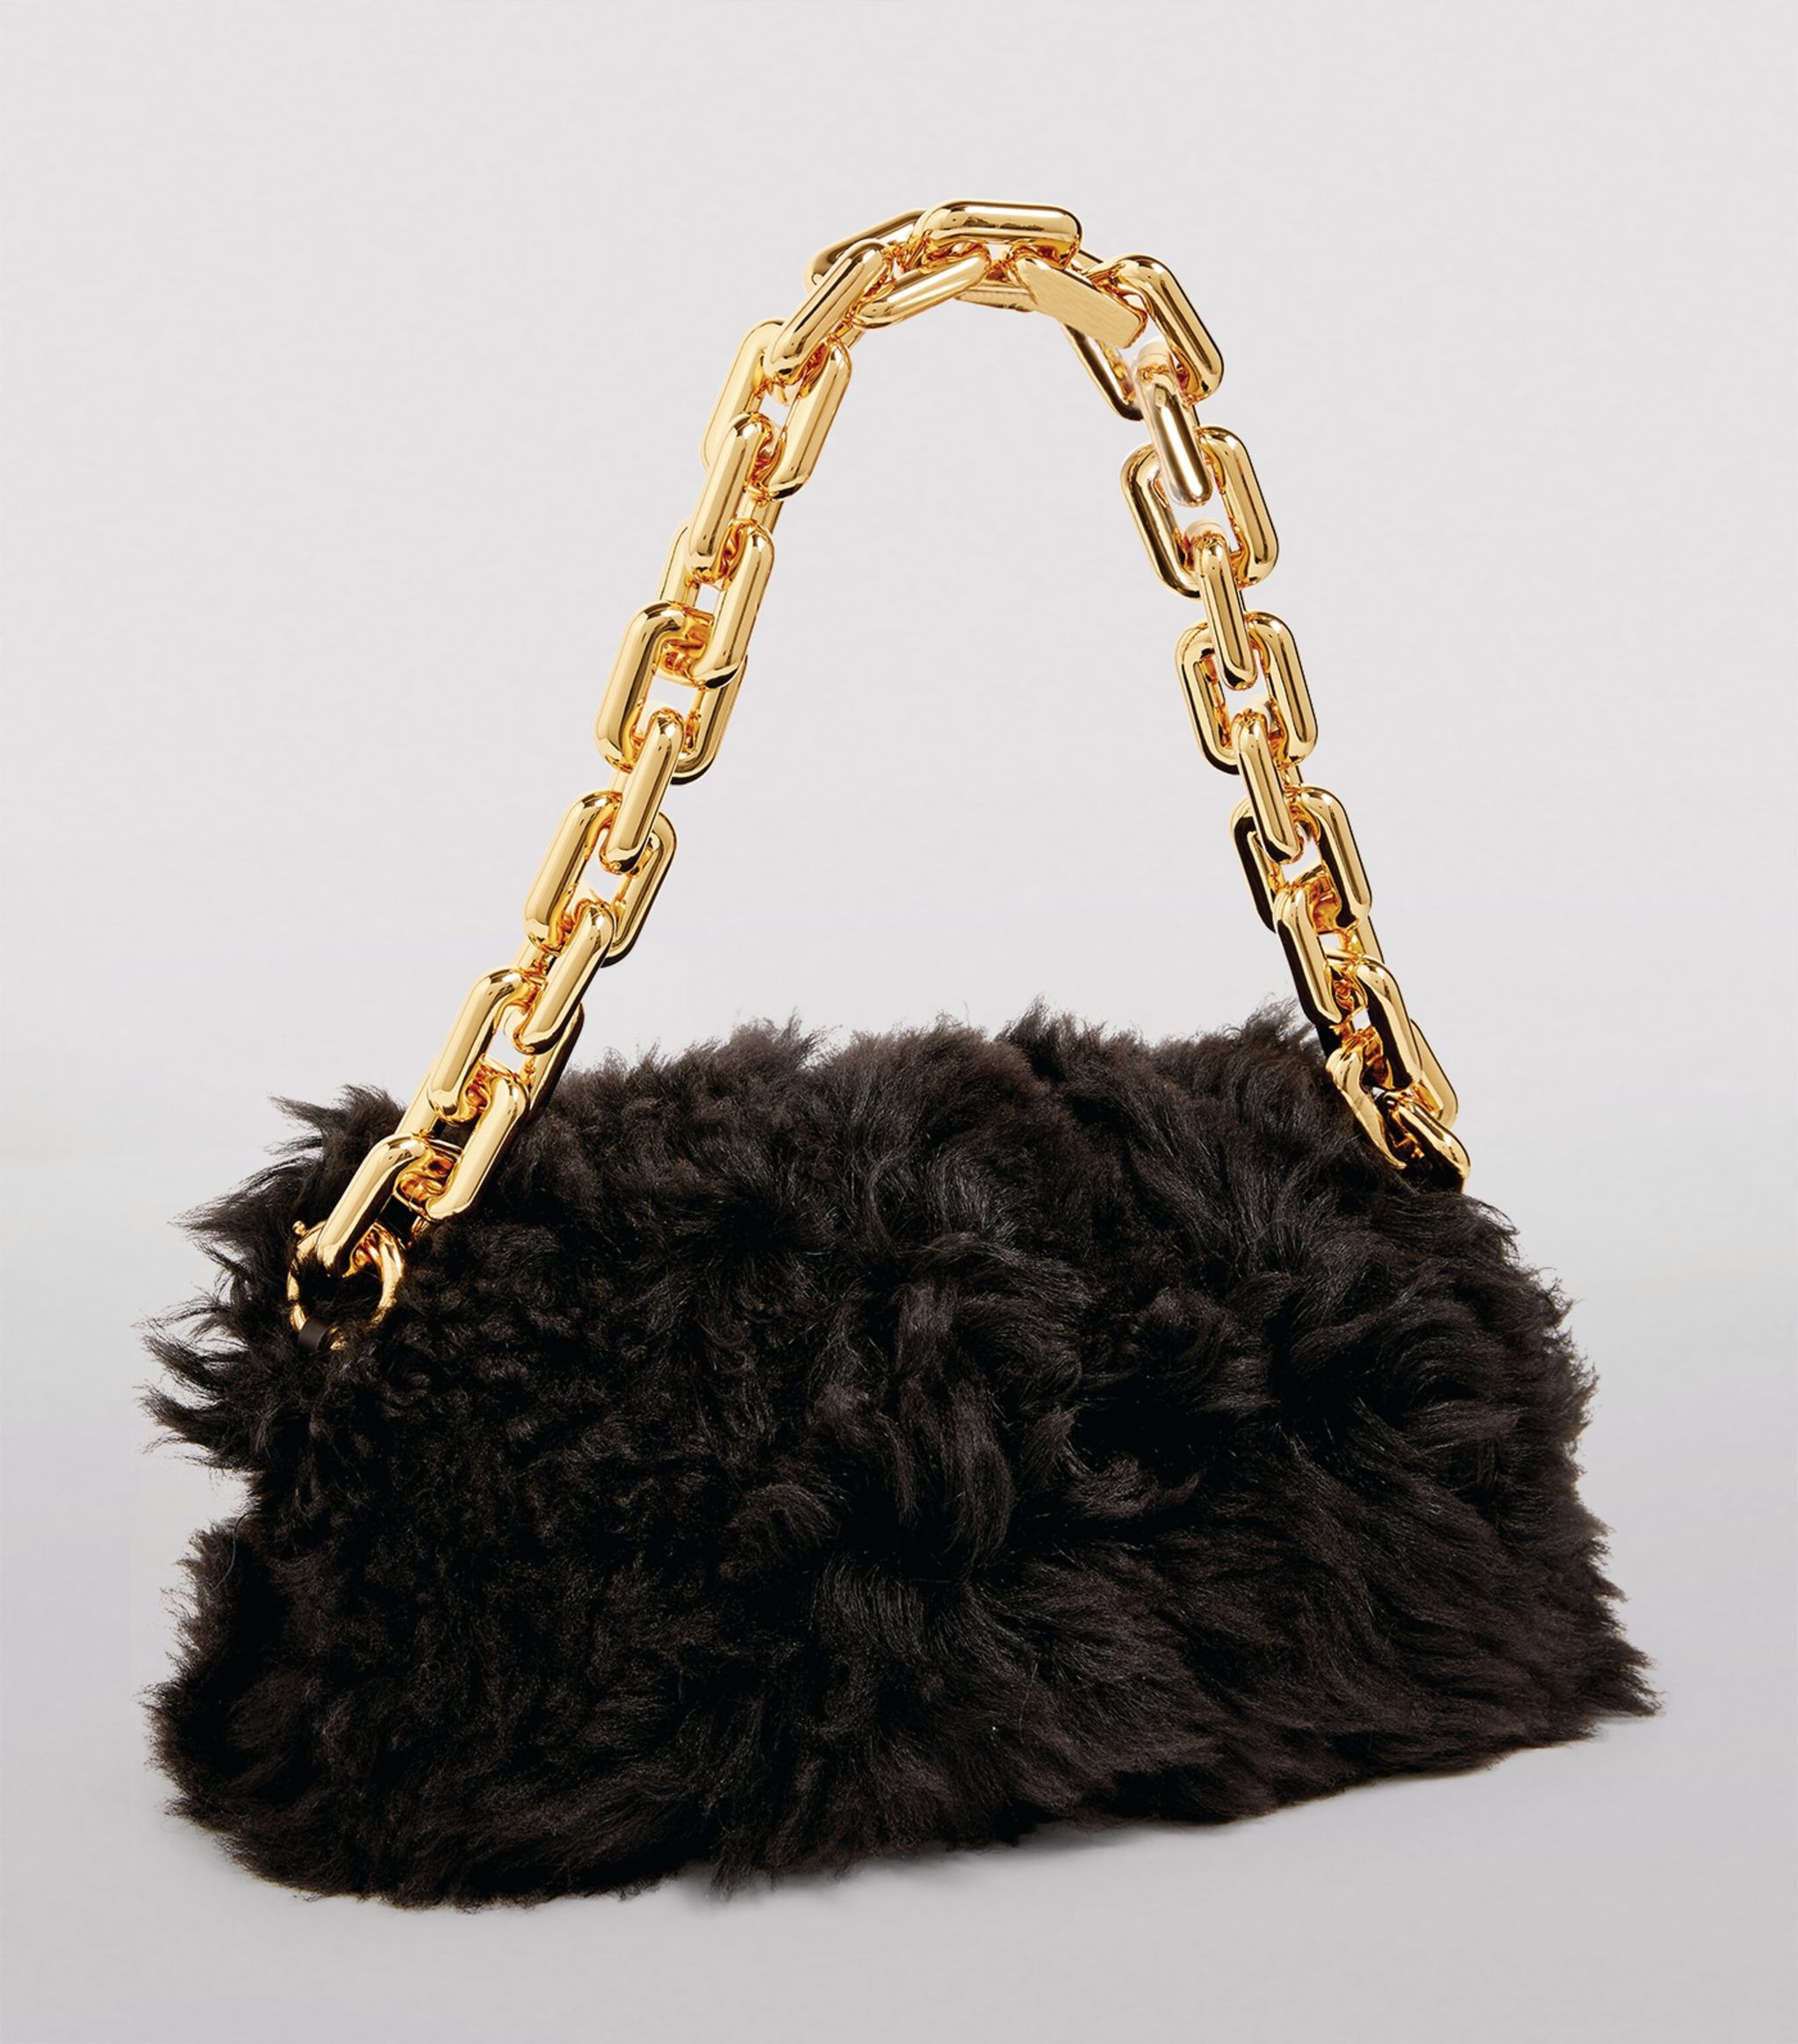 Elevate Your Winter Styles With These Bags